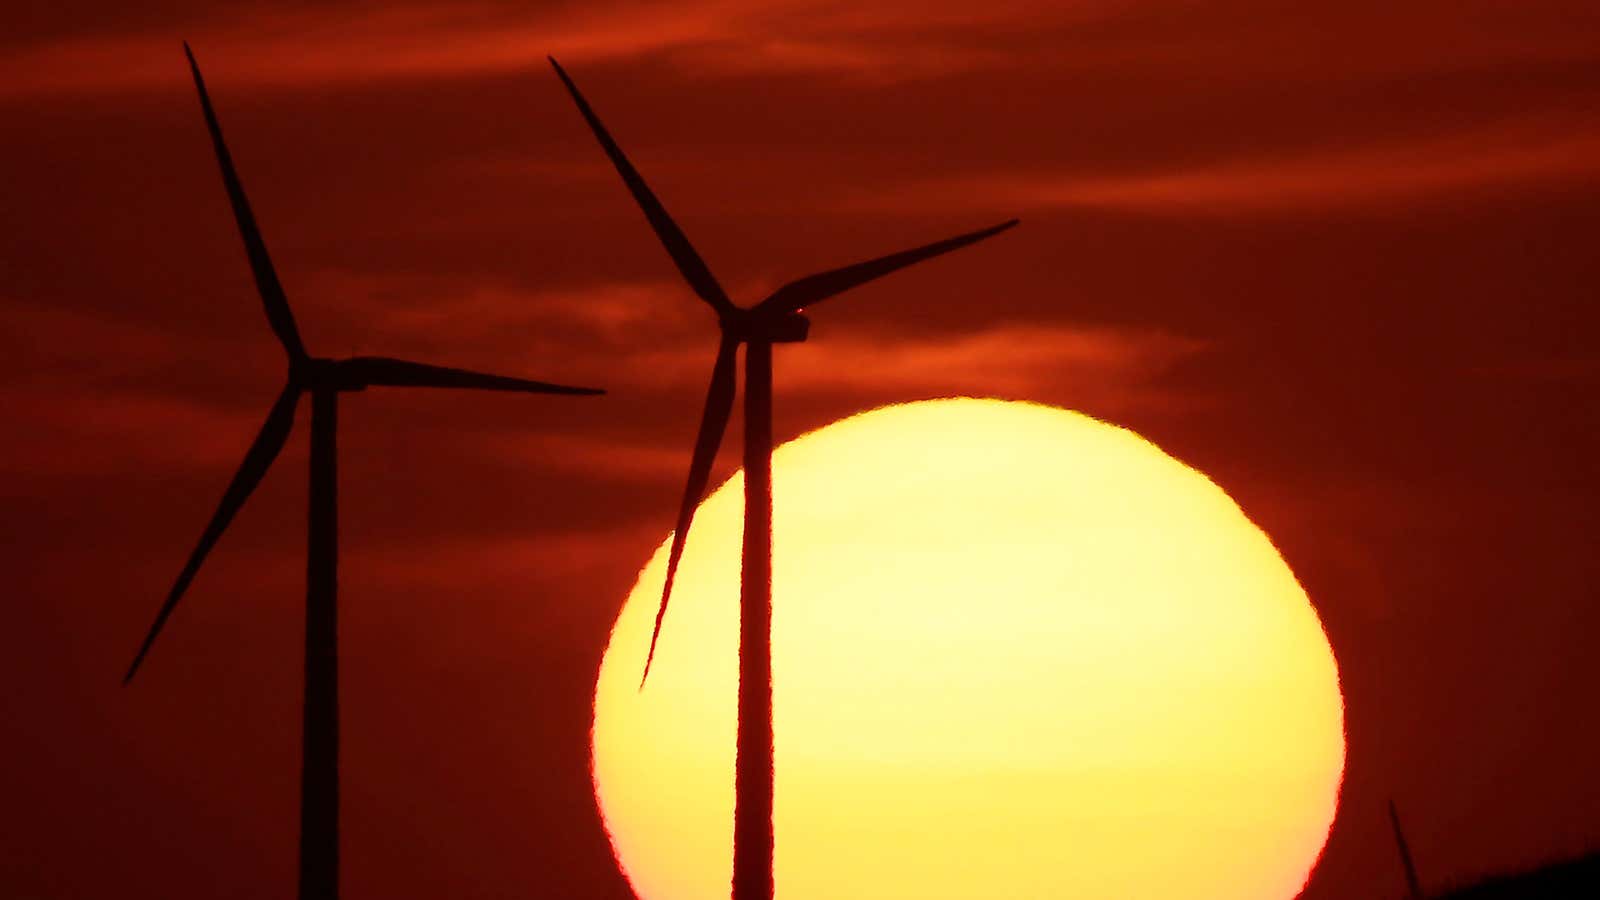 The sunset on fossil fuels is no longer a fairy tale.